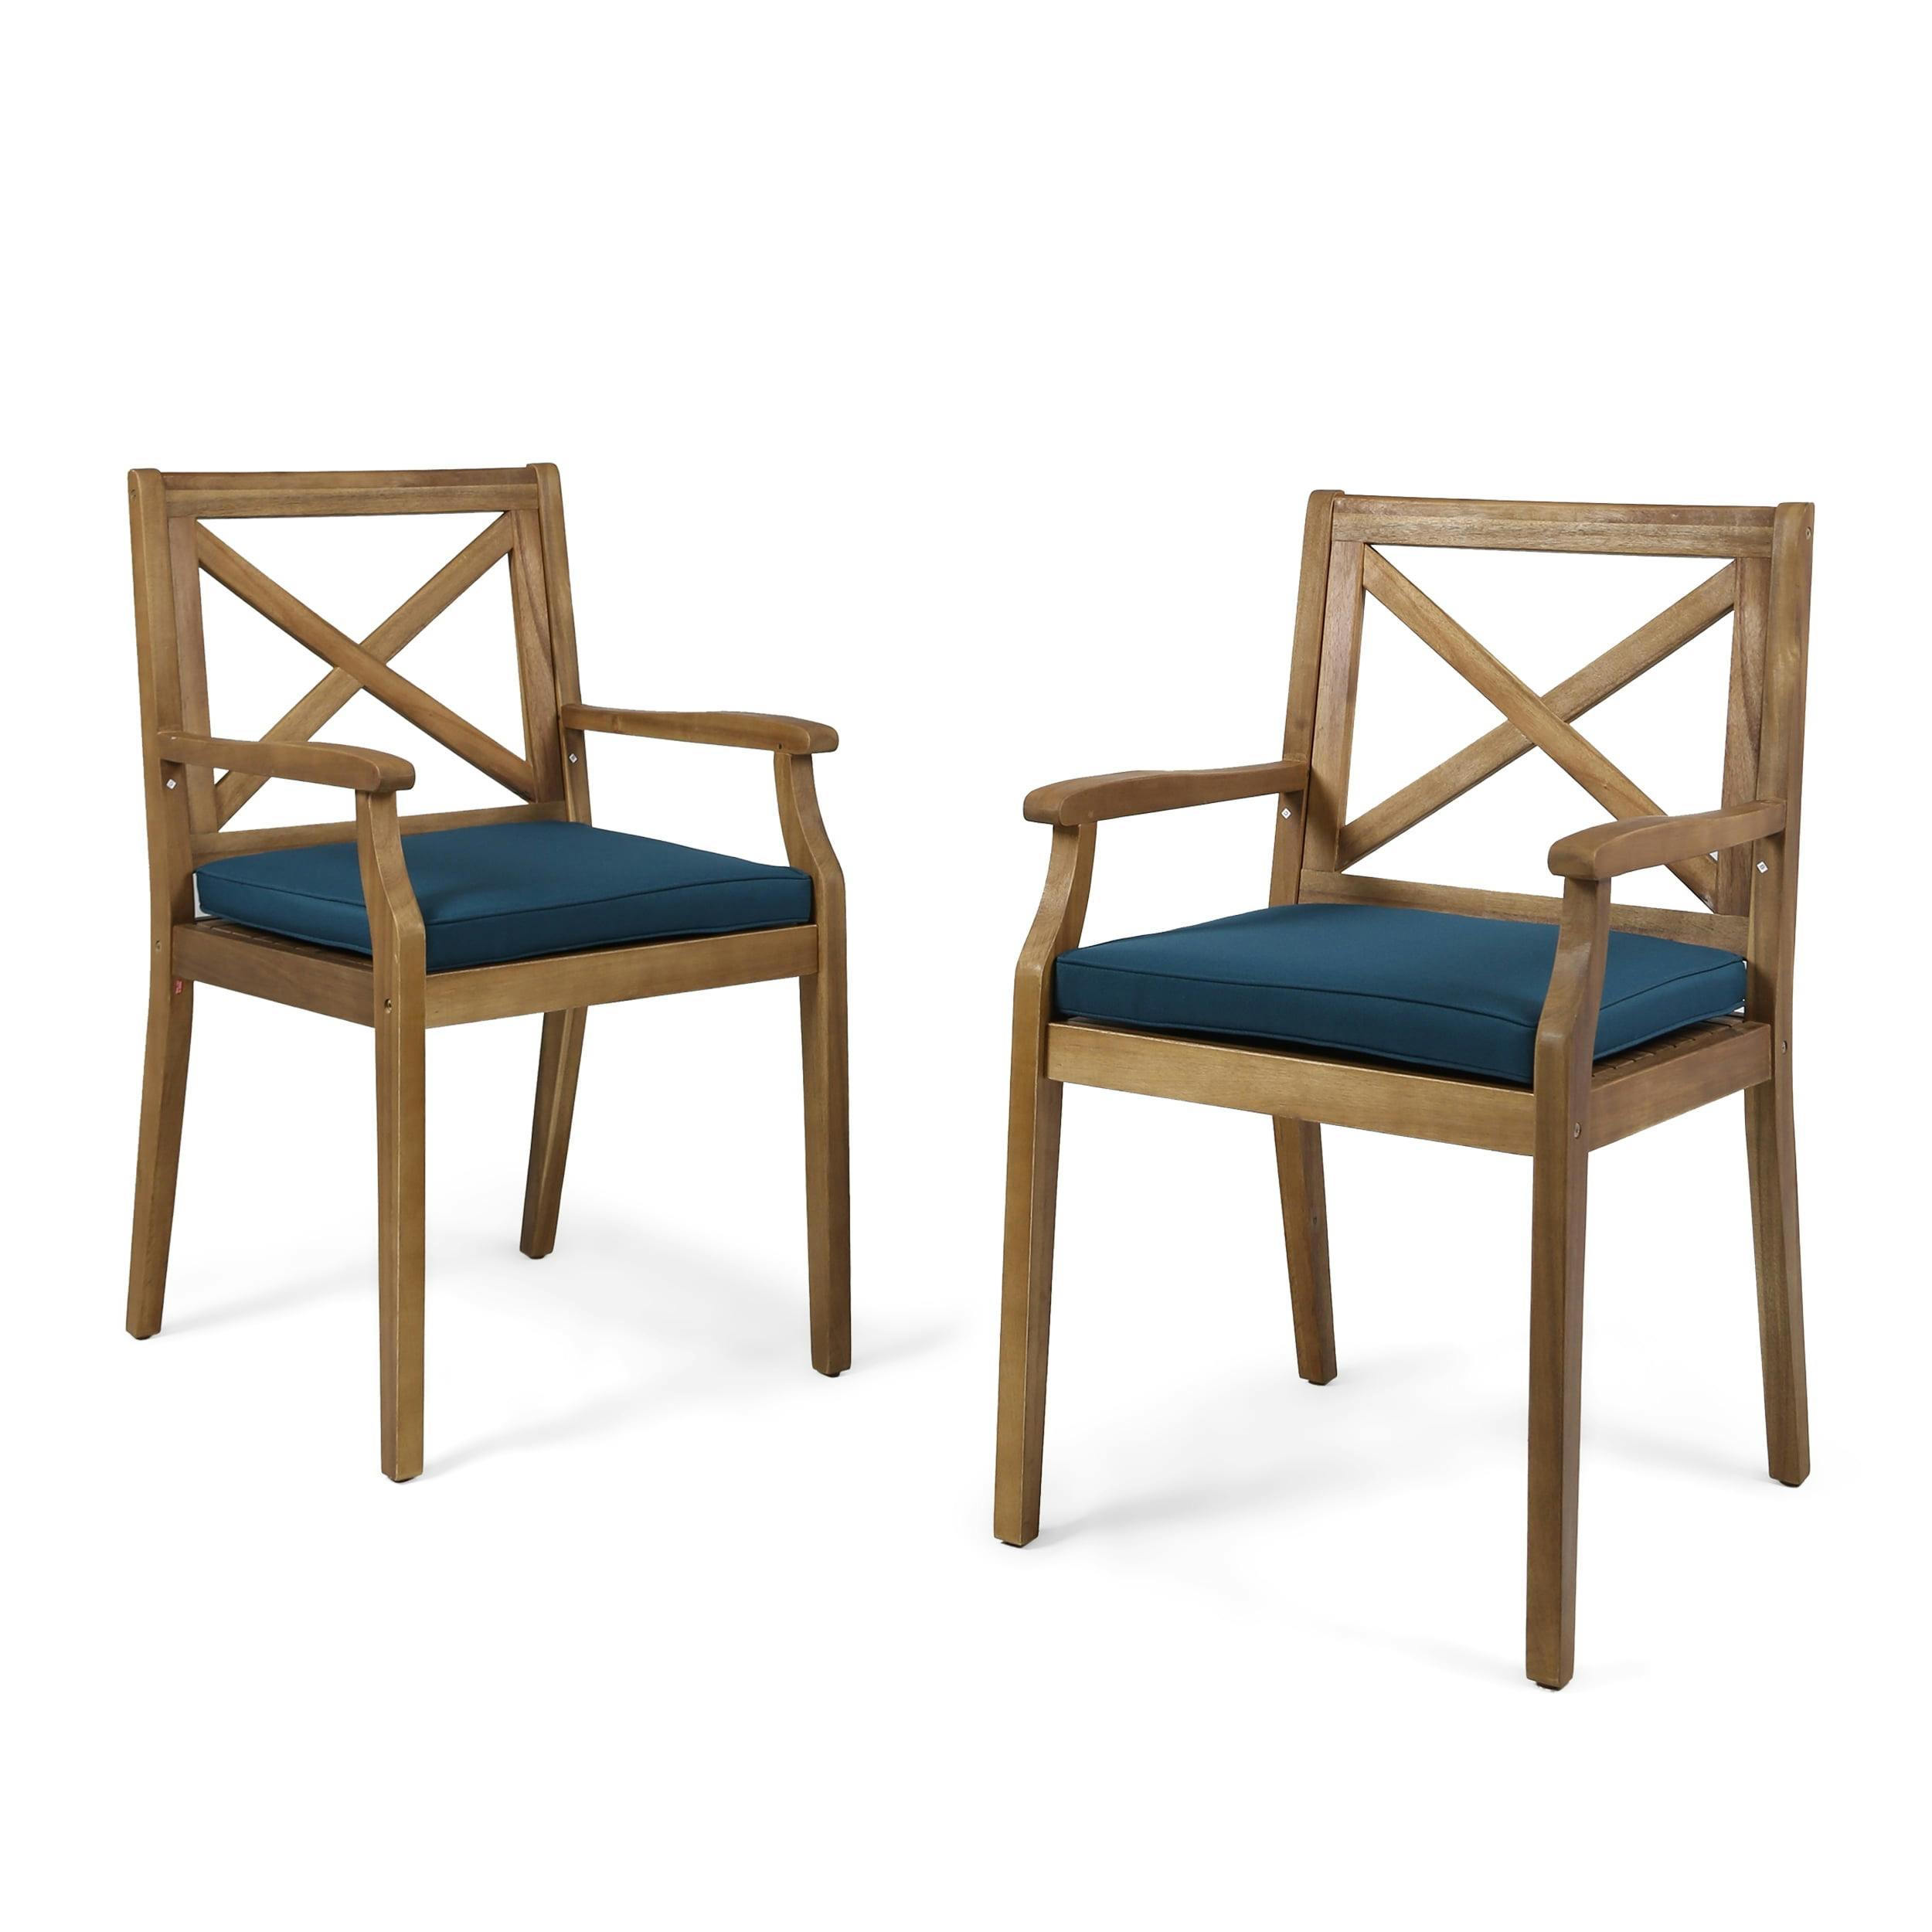 Scandinavian Teak Brown Wood Dining Chair with Blue Cushions, Set of 2